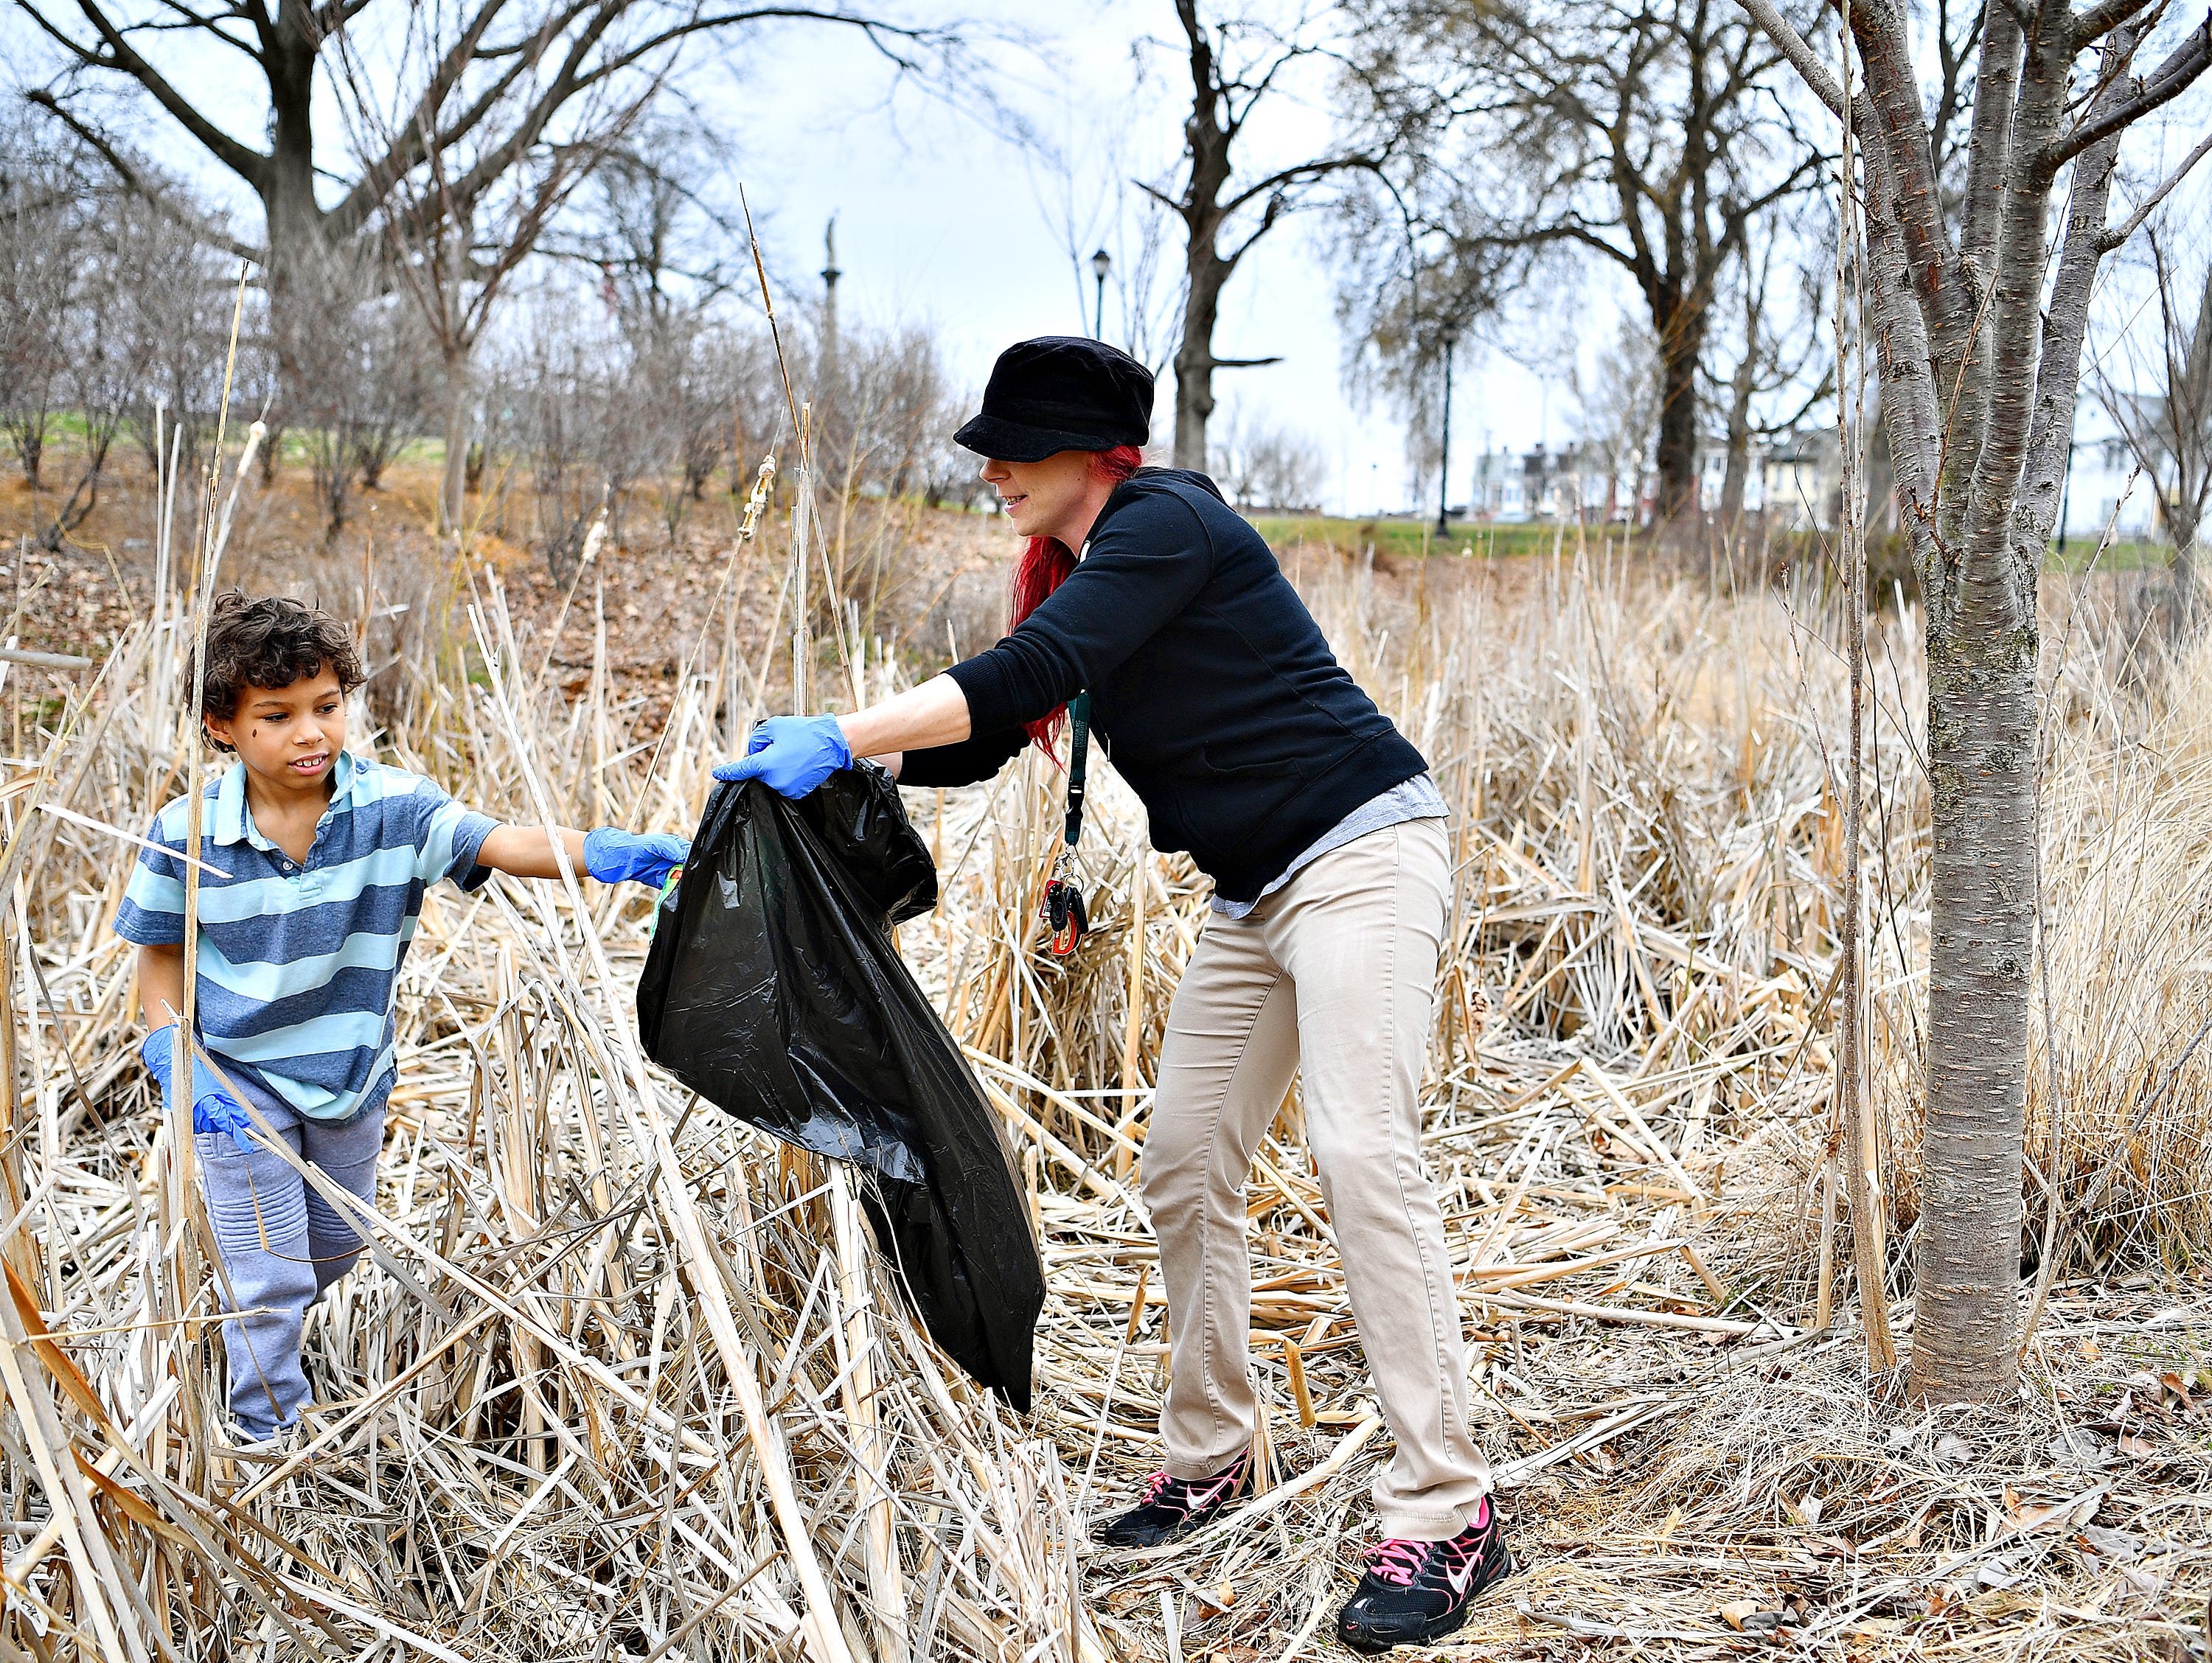 Parent liaison Destiney Boldizar, right, holds a bag out so her son, Dylan Boldizar, 8, can place trash in it as Edgar Fahs Smith STEAM Academy begins its Spring Neighborhood Cleanup at Penn Park in York City, Saturday, March 30, 2019. Dawn J. Sagert photo